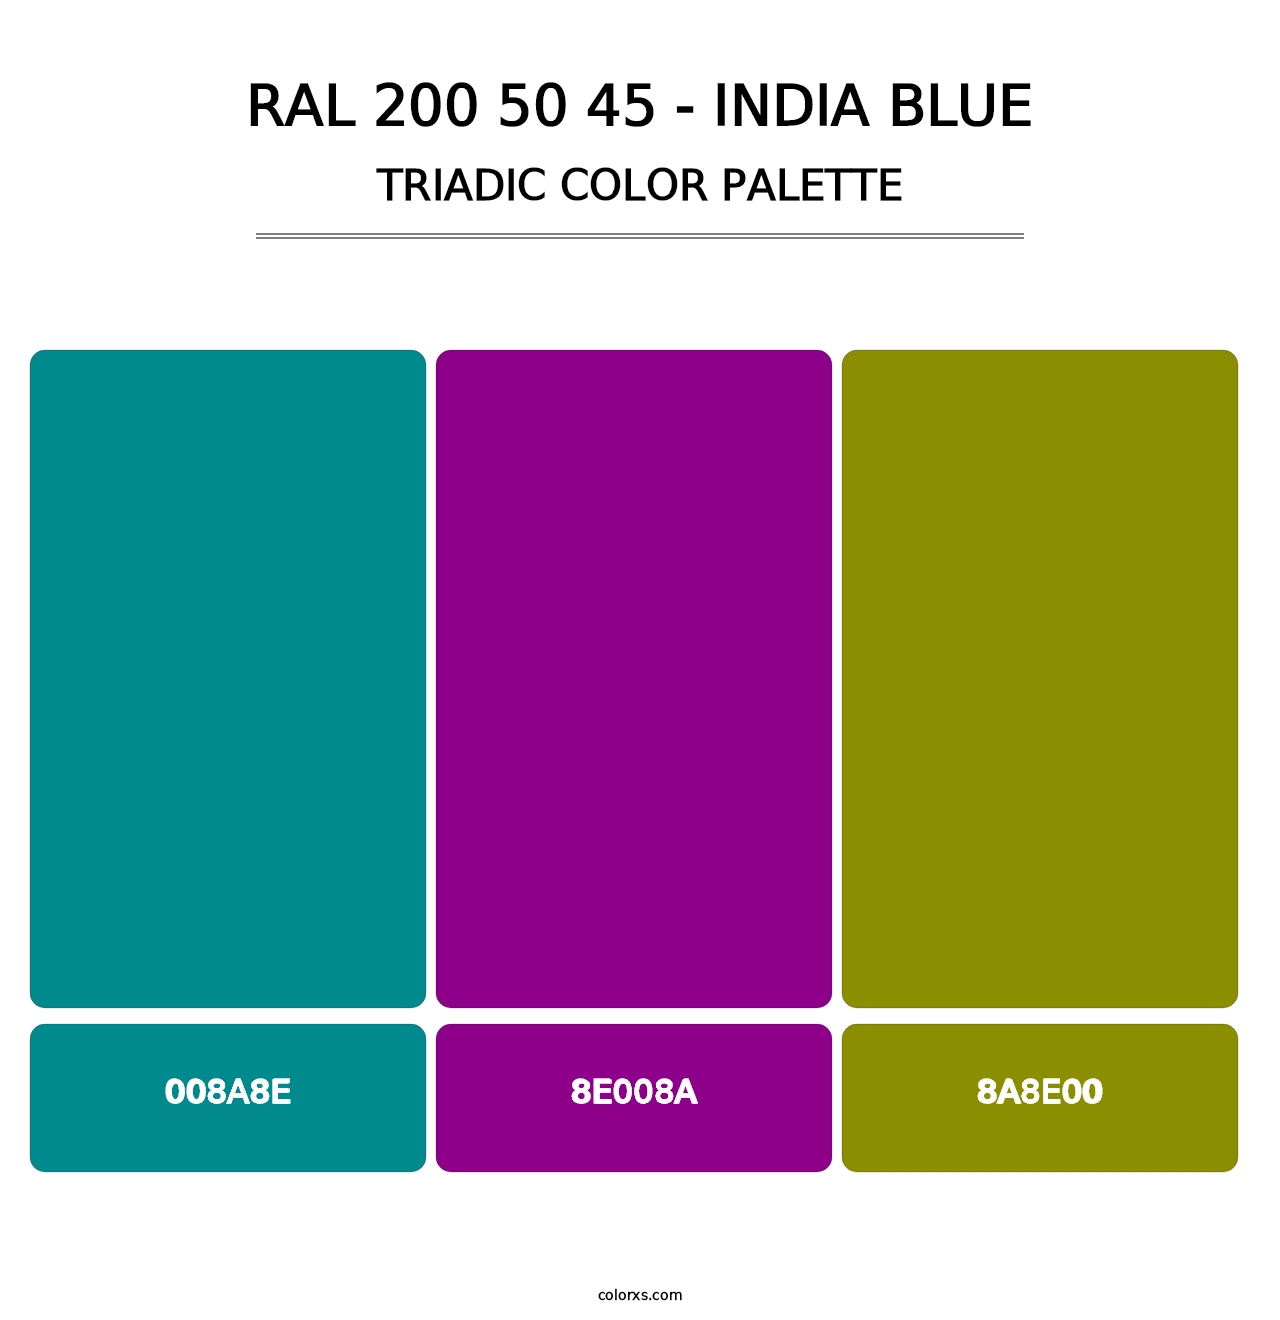 RAL 200 50 45 - India Blue - Triadic Color Palette